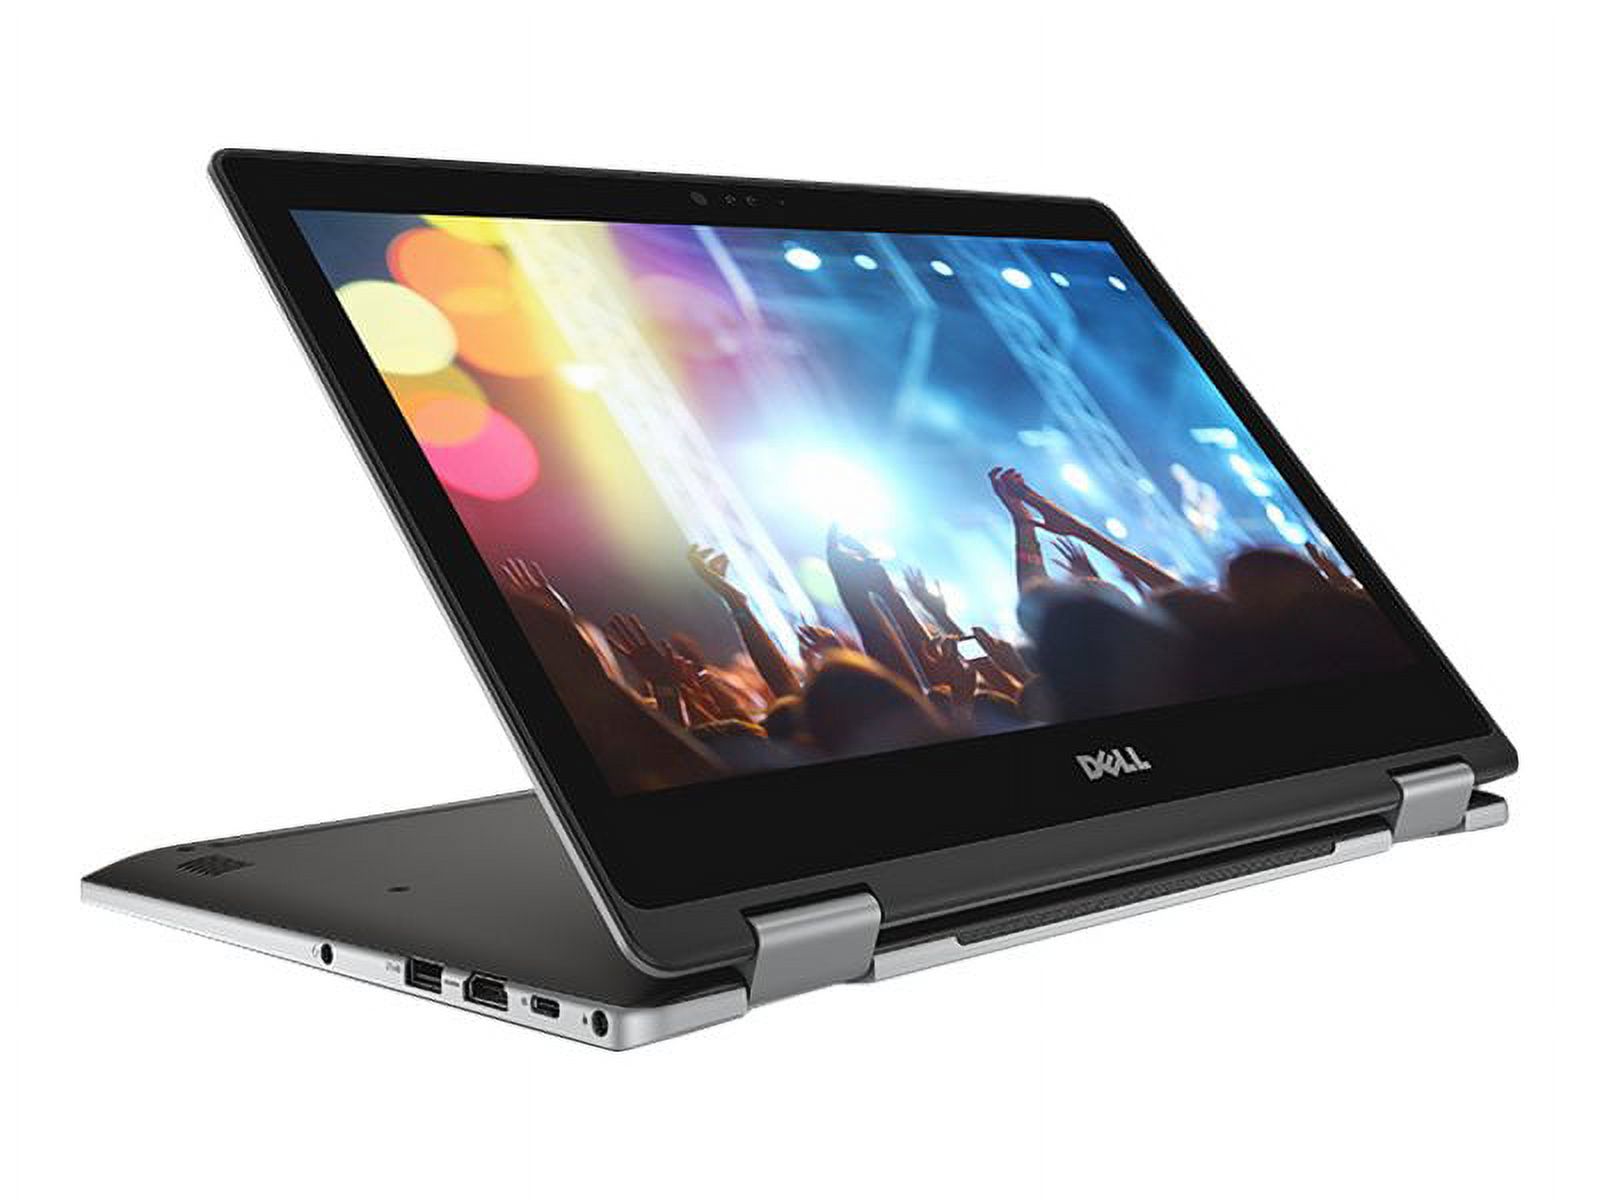 Dell Inspiron 13 7378 2-in-1 - Flip design - Intel Core i7 - 7500U / up to 3.5 GHz - Win 10 Home 64-bit - HD Graphics 620 - 12 GB RAM - 256 GB SSD - 13.3" IPS touchscreen 1920 x 1080 (Full HD) - Wi-Fi 5 - gray - kbd: English - with 1 Year Dell Mail-In Service - image 1 of 6